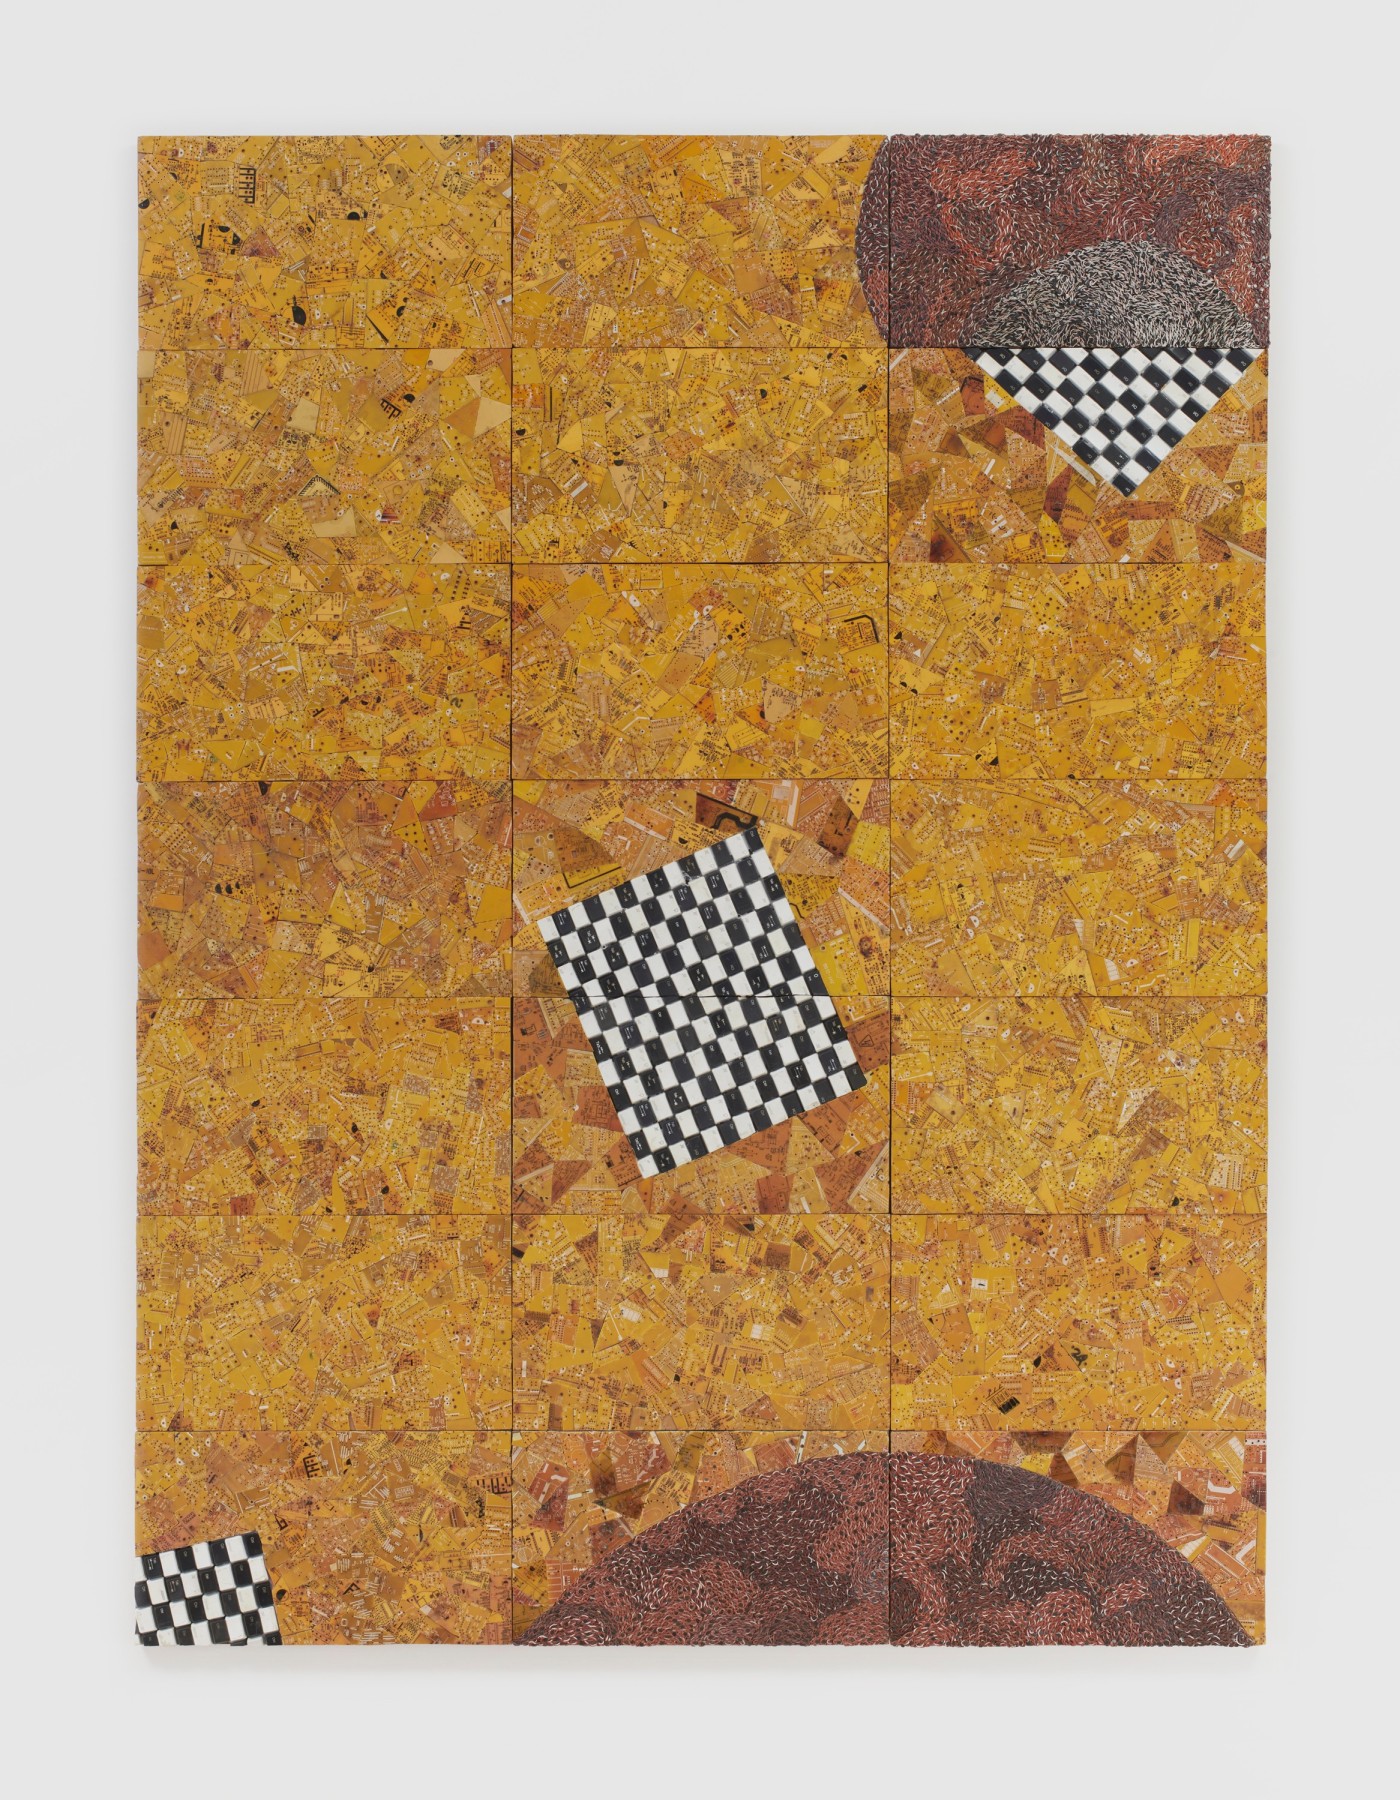 Yellow and checkered surface composed of reclaimed electrical wires and components